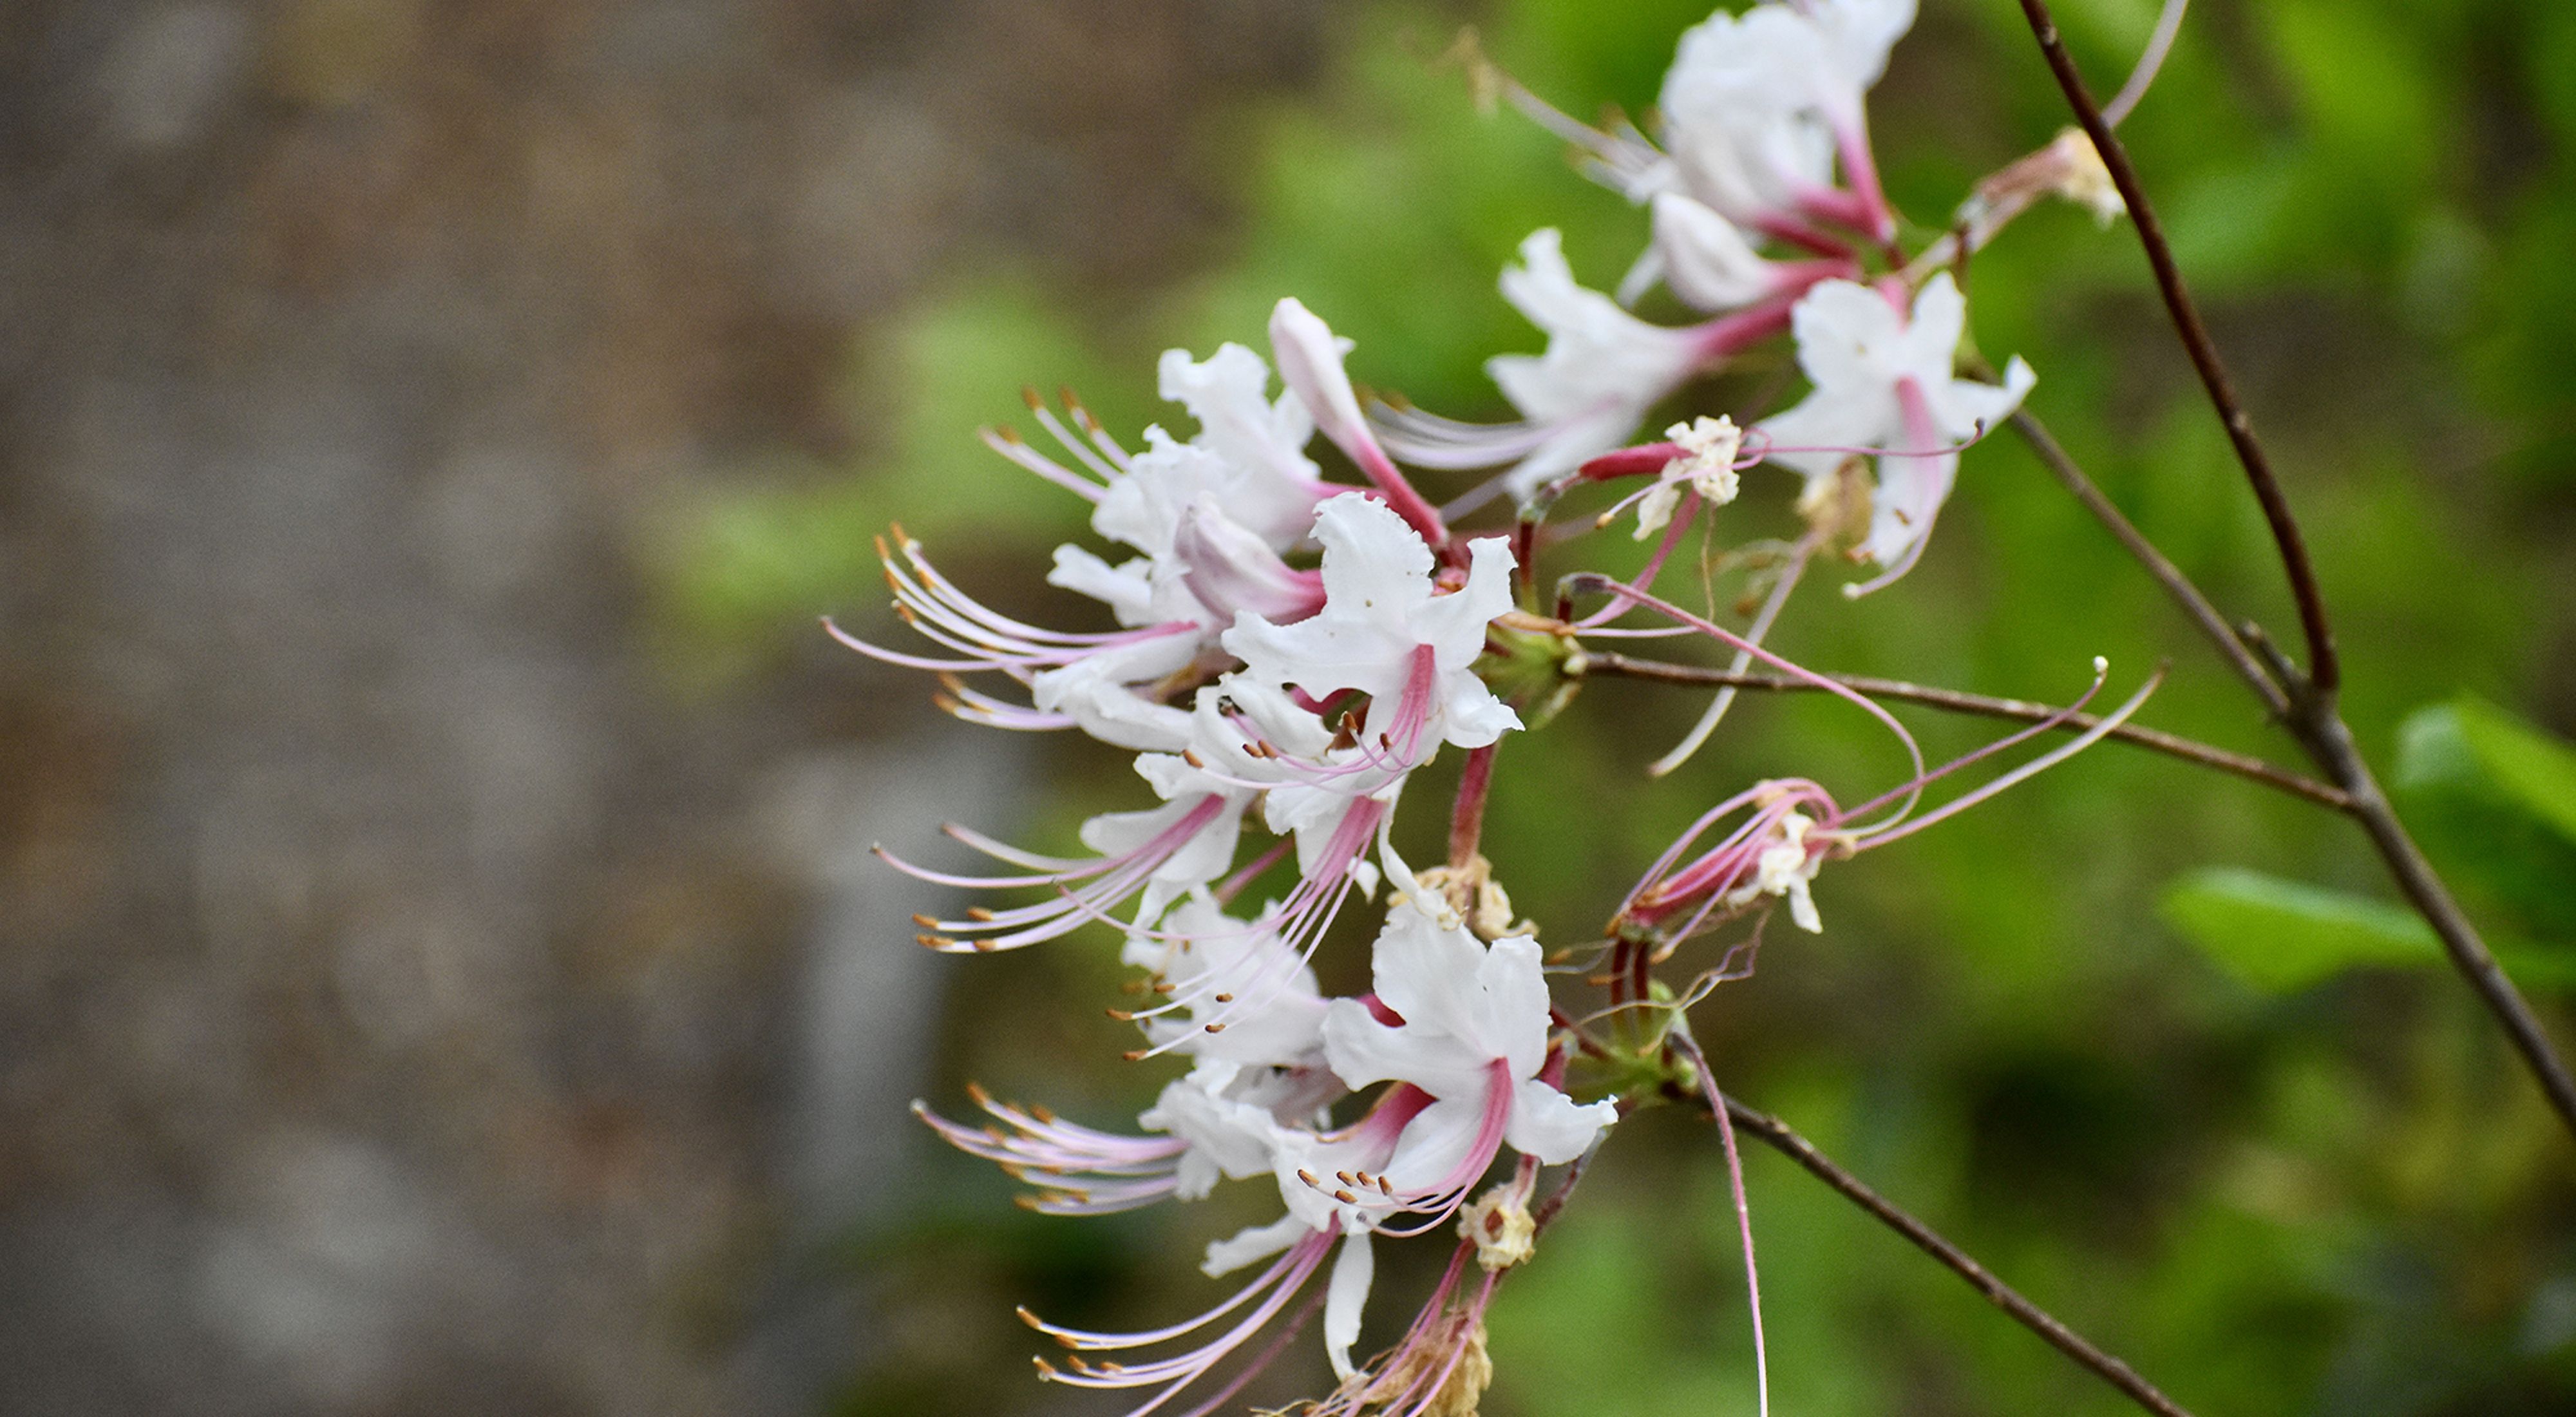 Delicate pink and white flowers bloom on the end of slender branches at a TNC preserve.